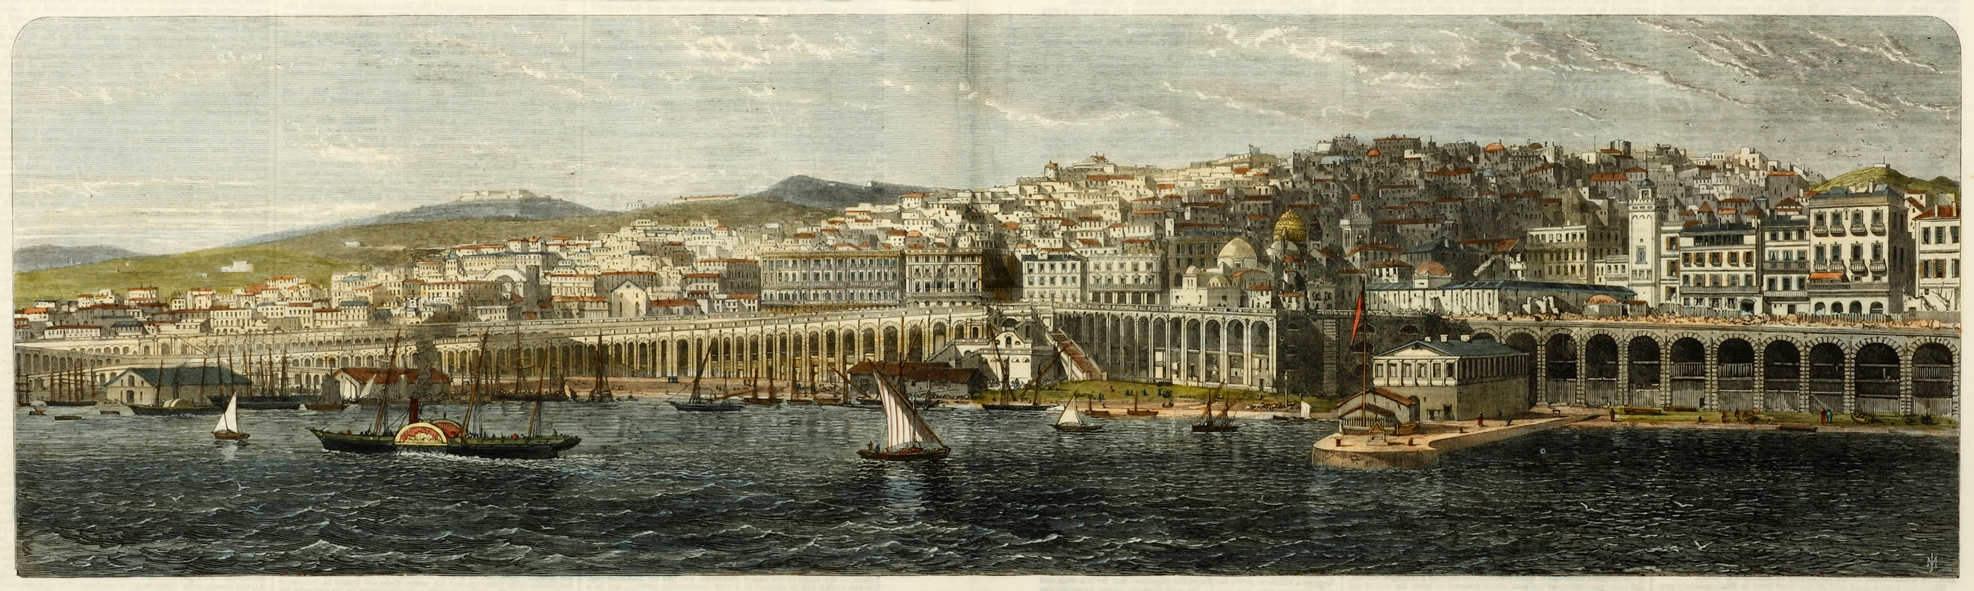 General View of the City of Algiers from the Sea. - Antique Print from 1865